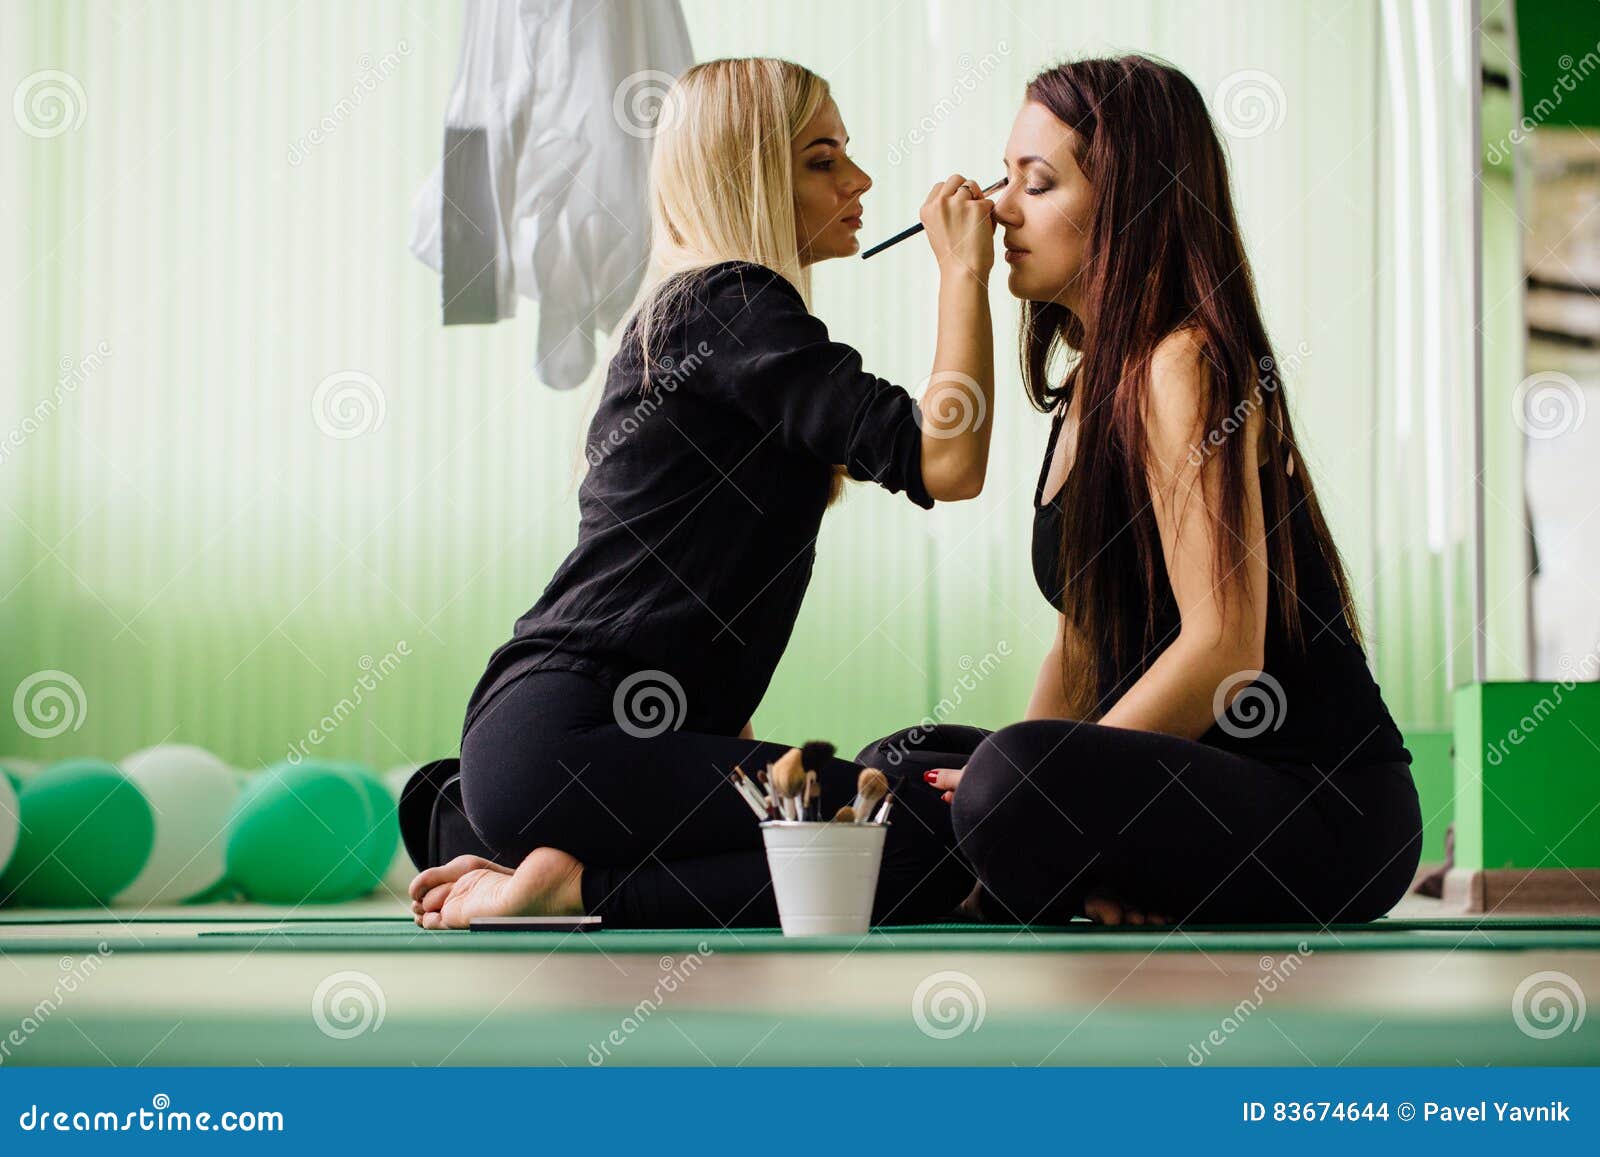 Professional Makeup Artist Working With Beautiful Young Woman